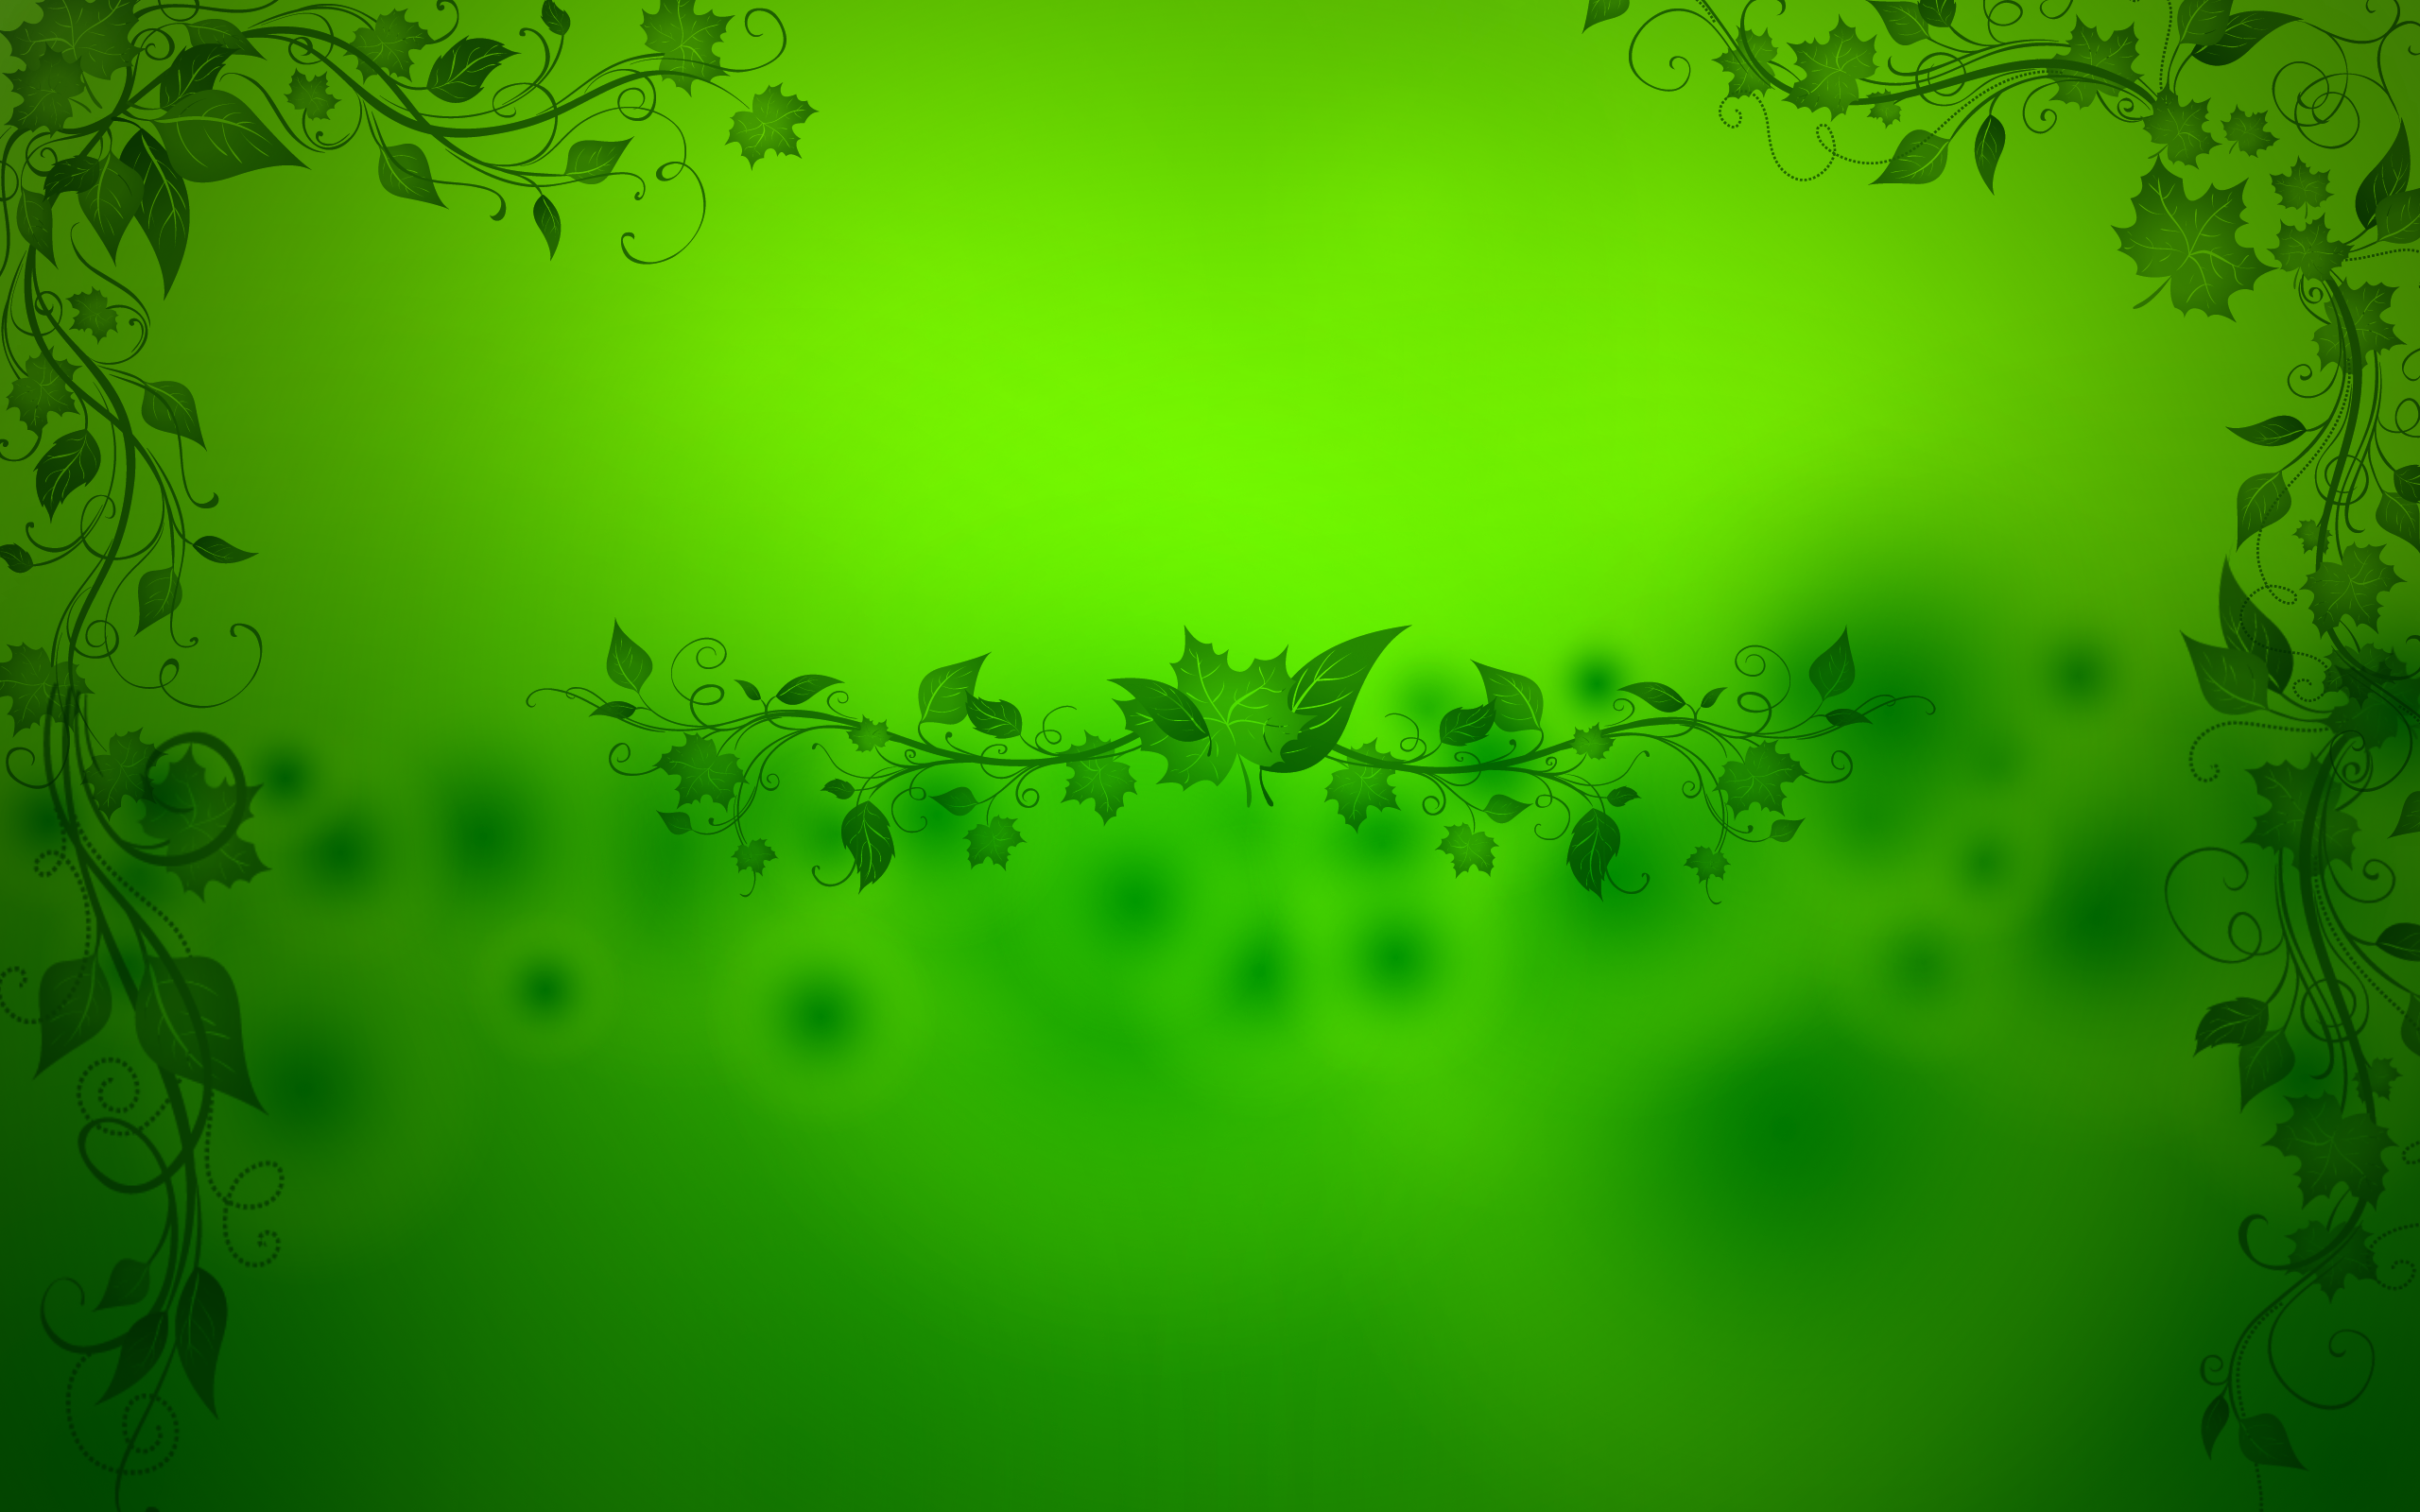 2560x1600 px Green Widescreen Image | Best Pictures, v.64